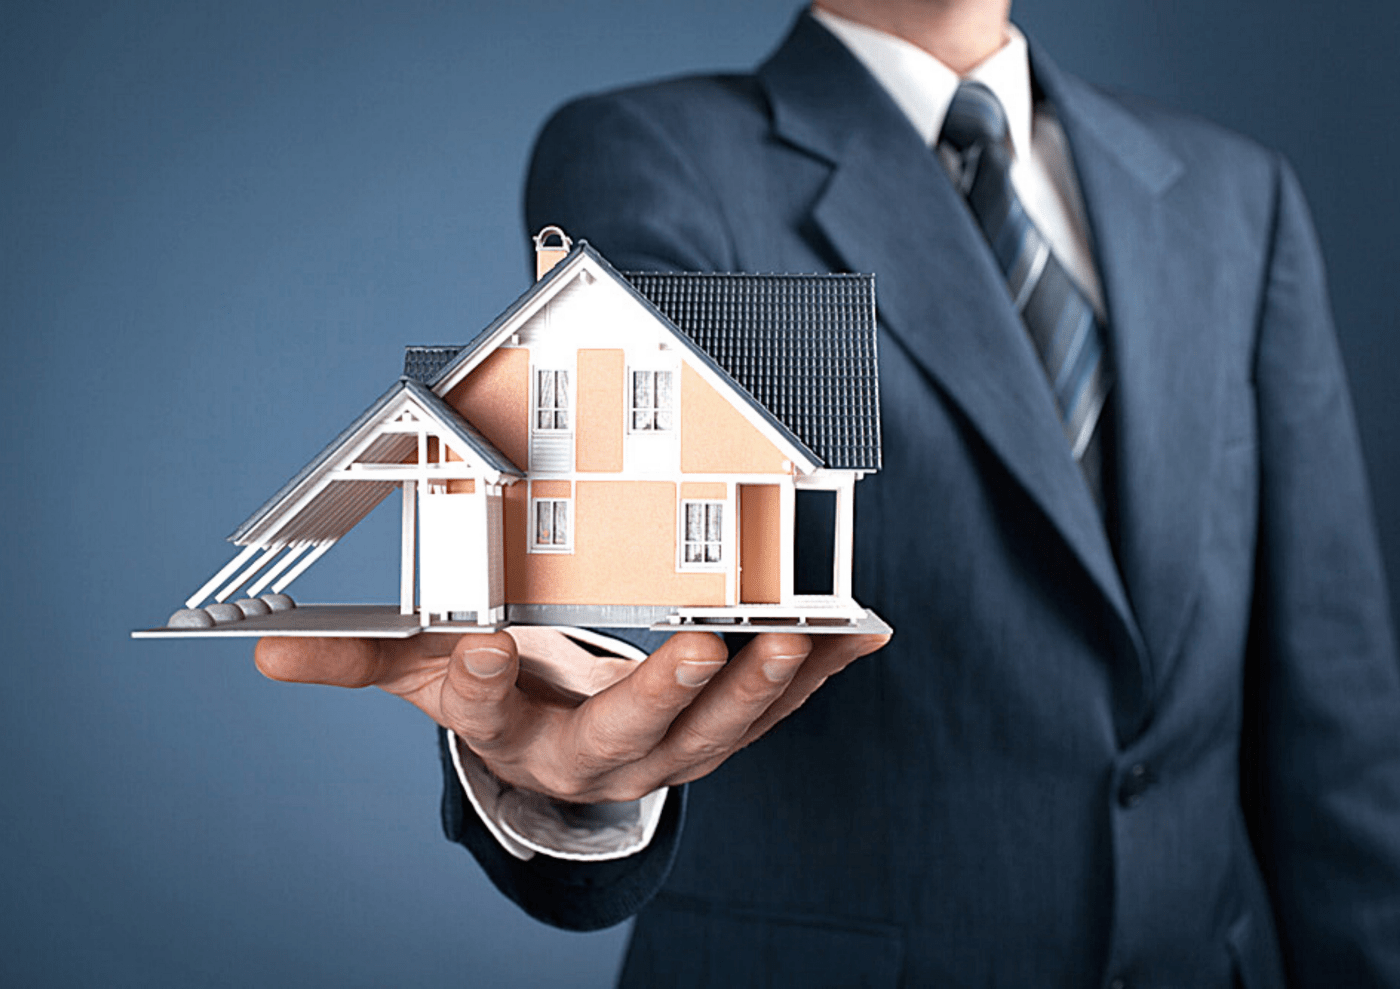 Investment Opportunity in Real Estate Sector